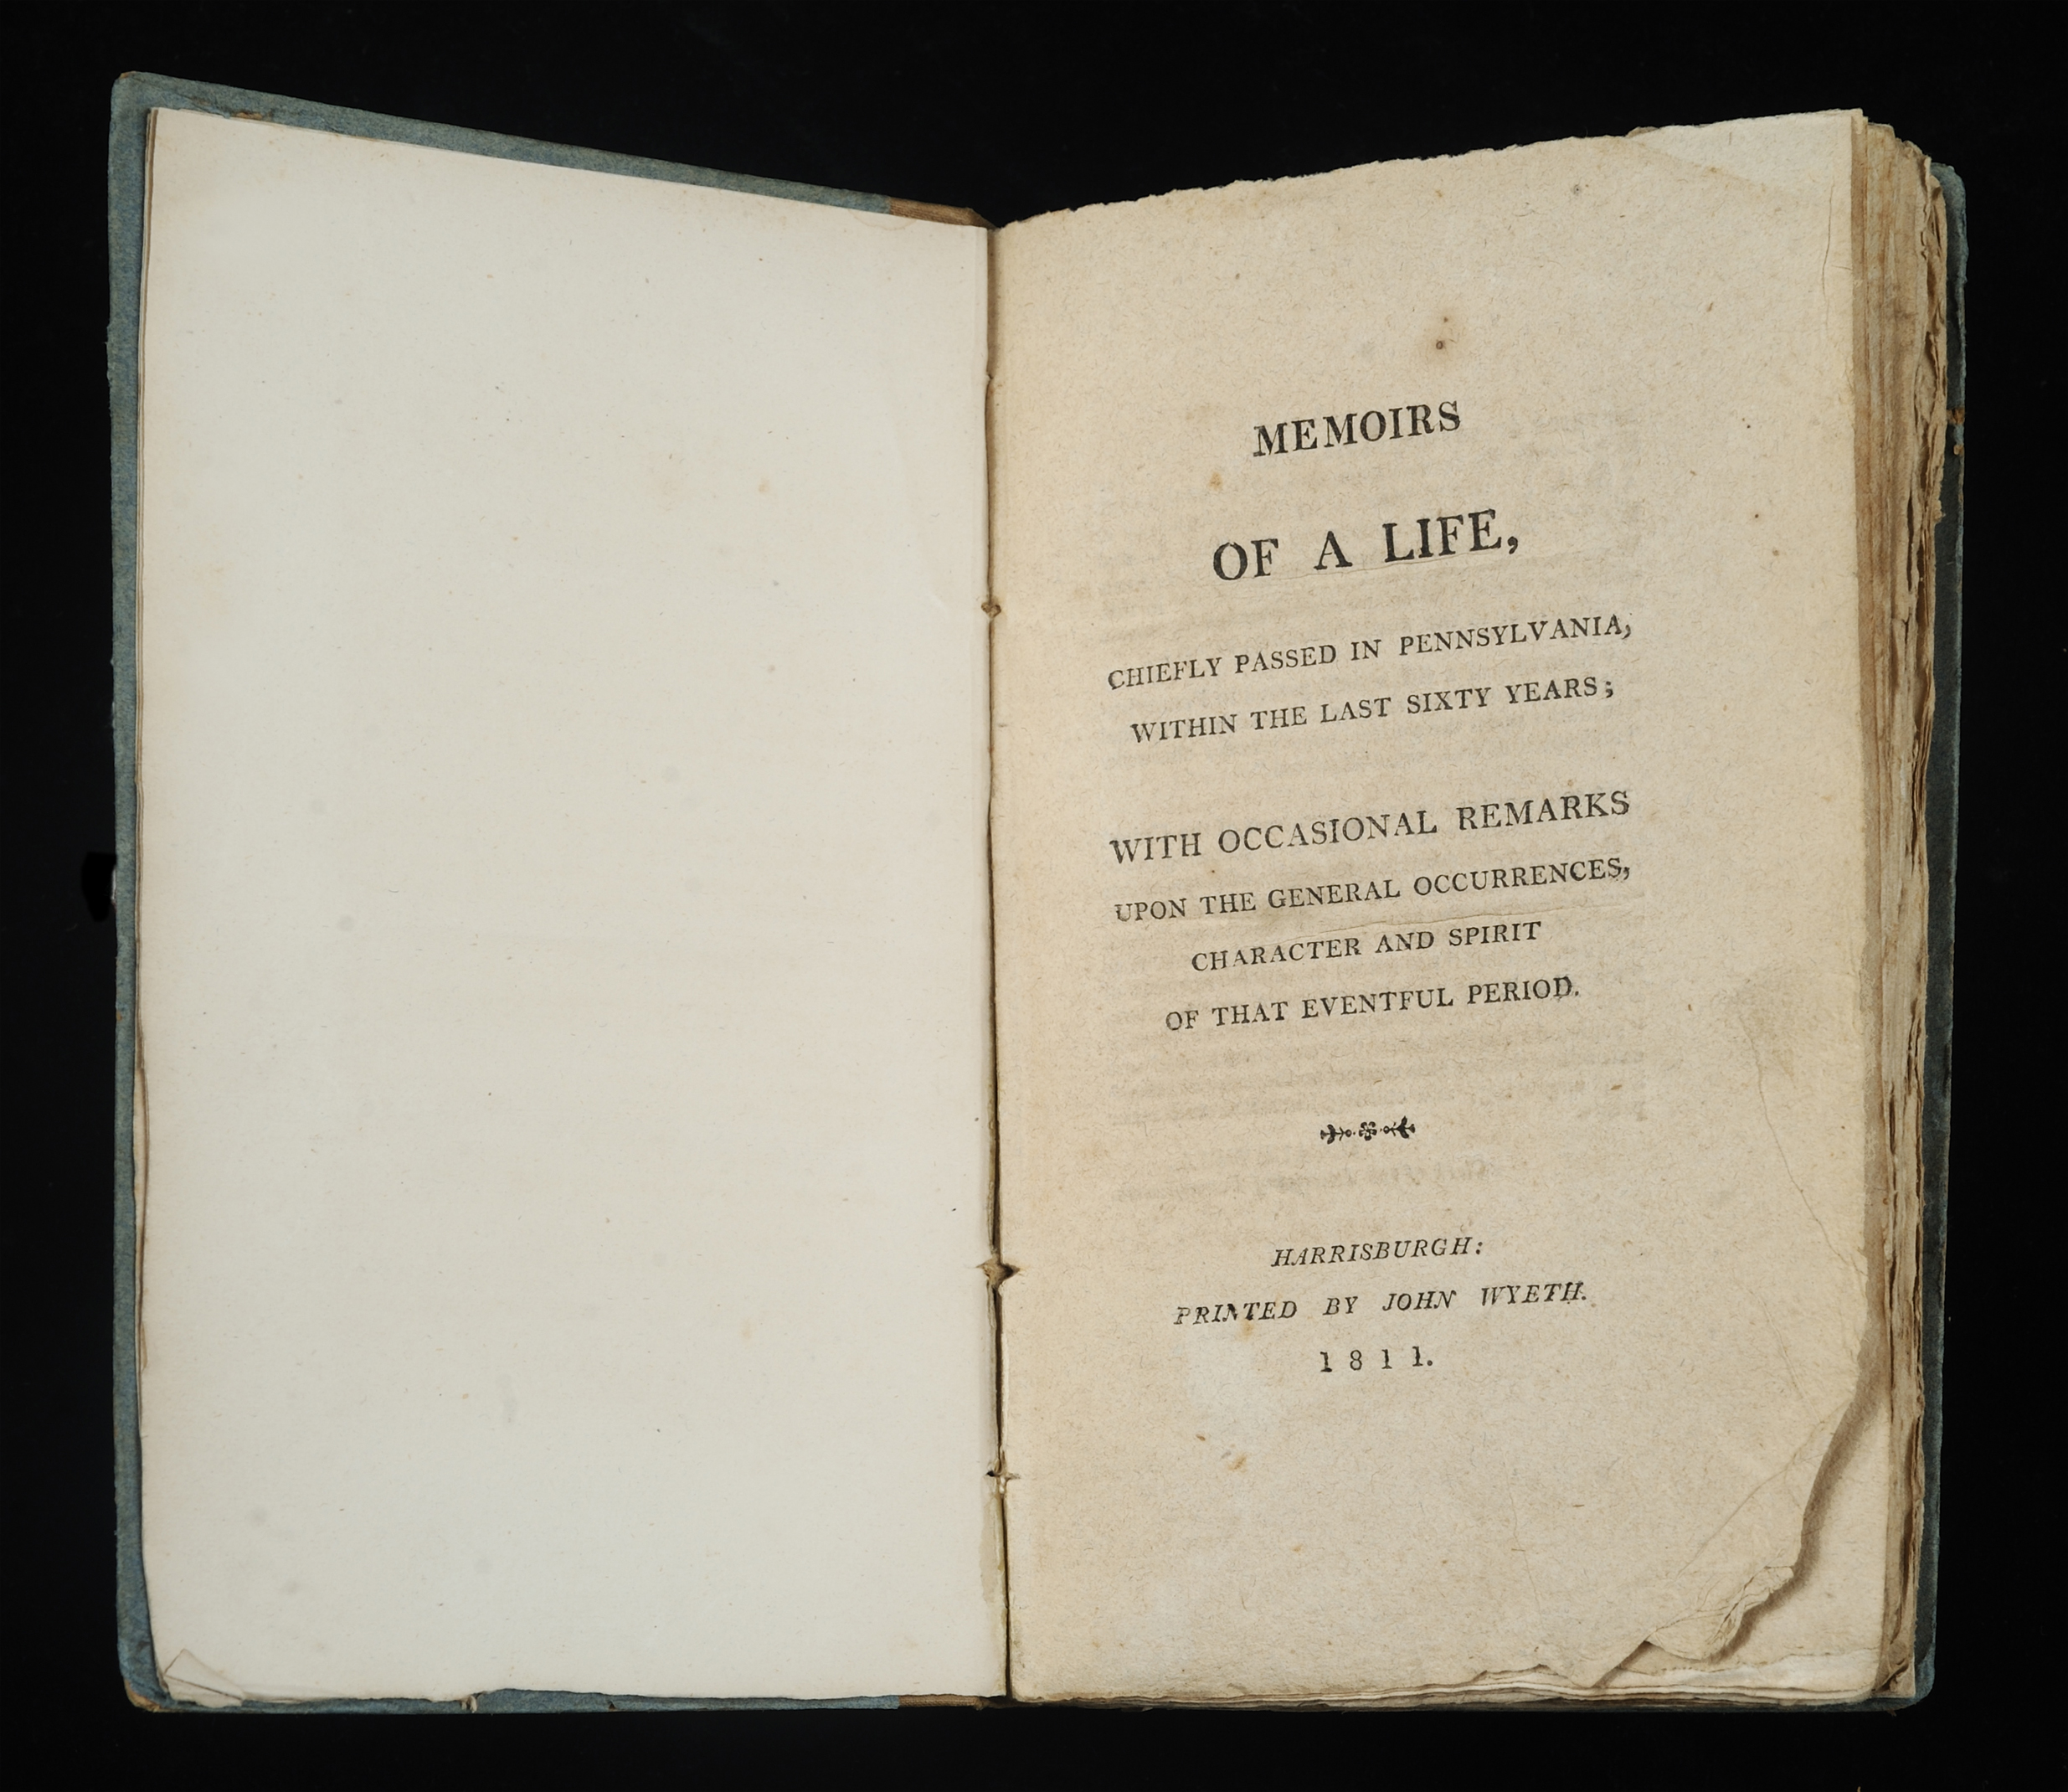 Memoirs of a Life, Chiefly Passed in Pennsylvania, 1811